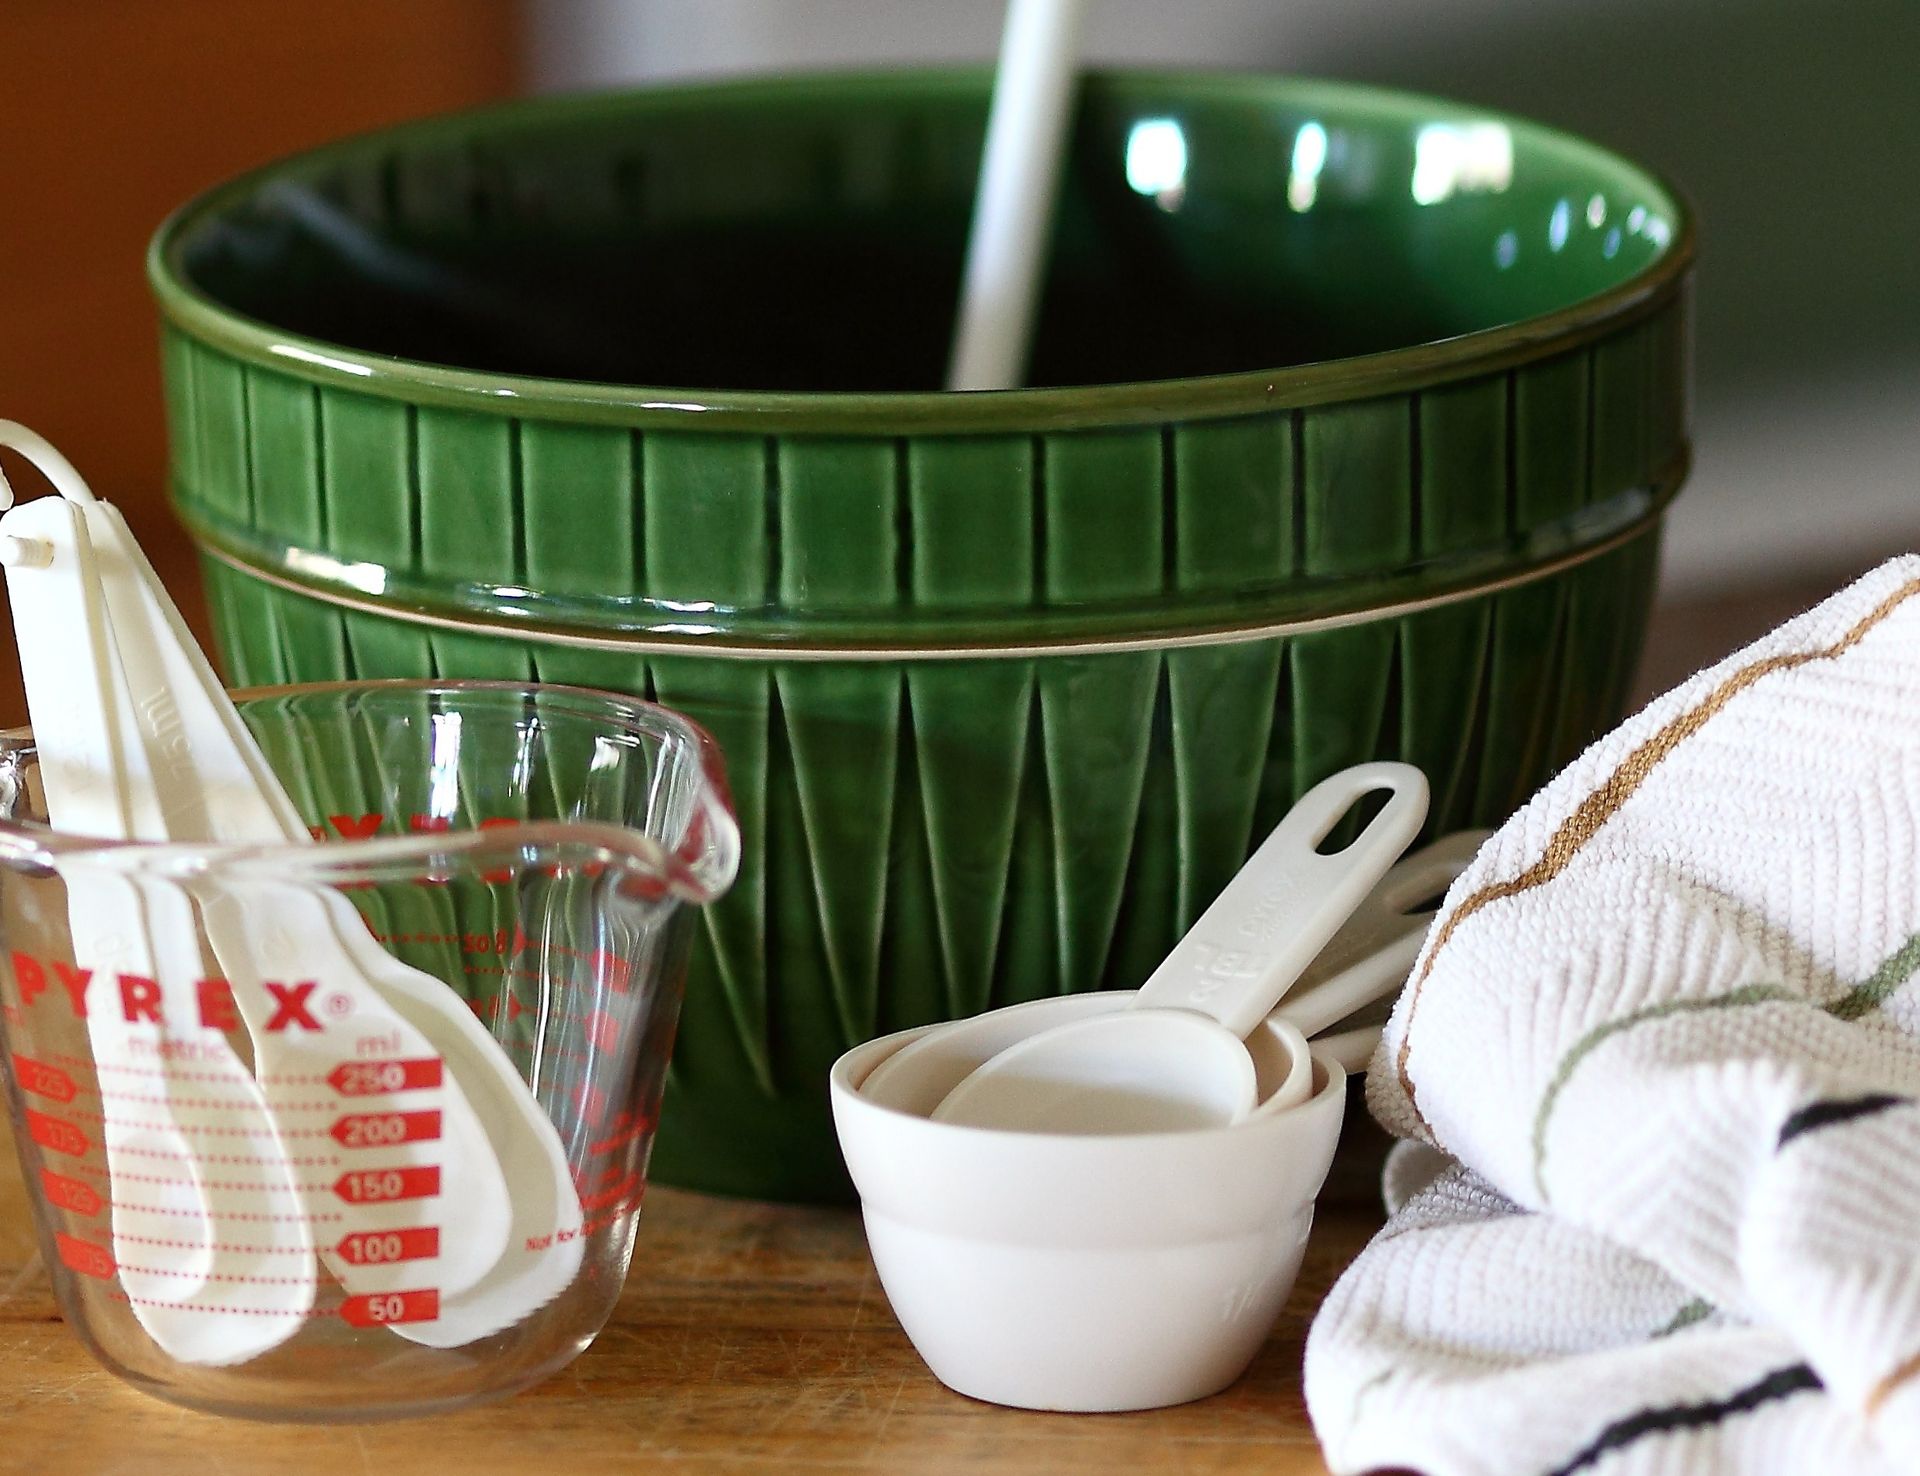 Measuring cups and a mixing bowl used for baking.